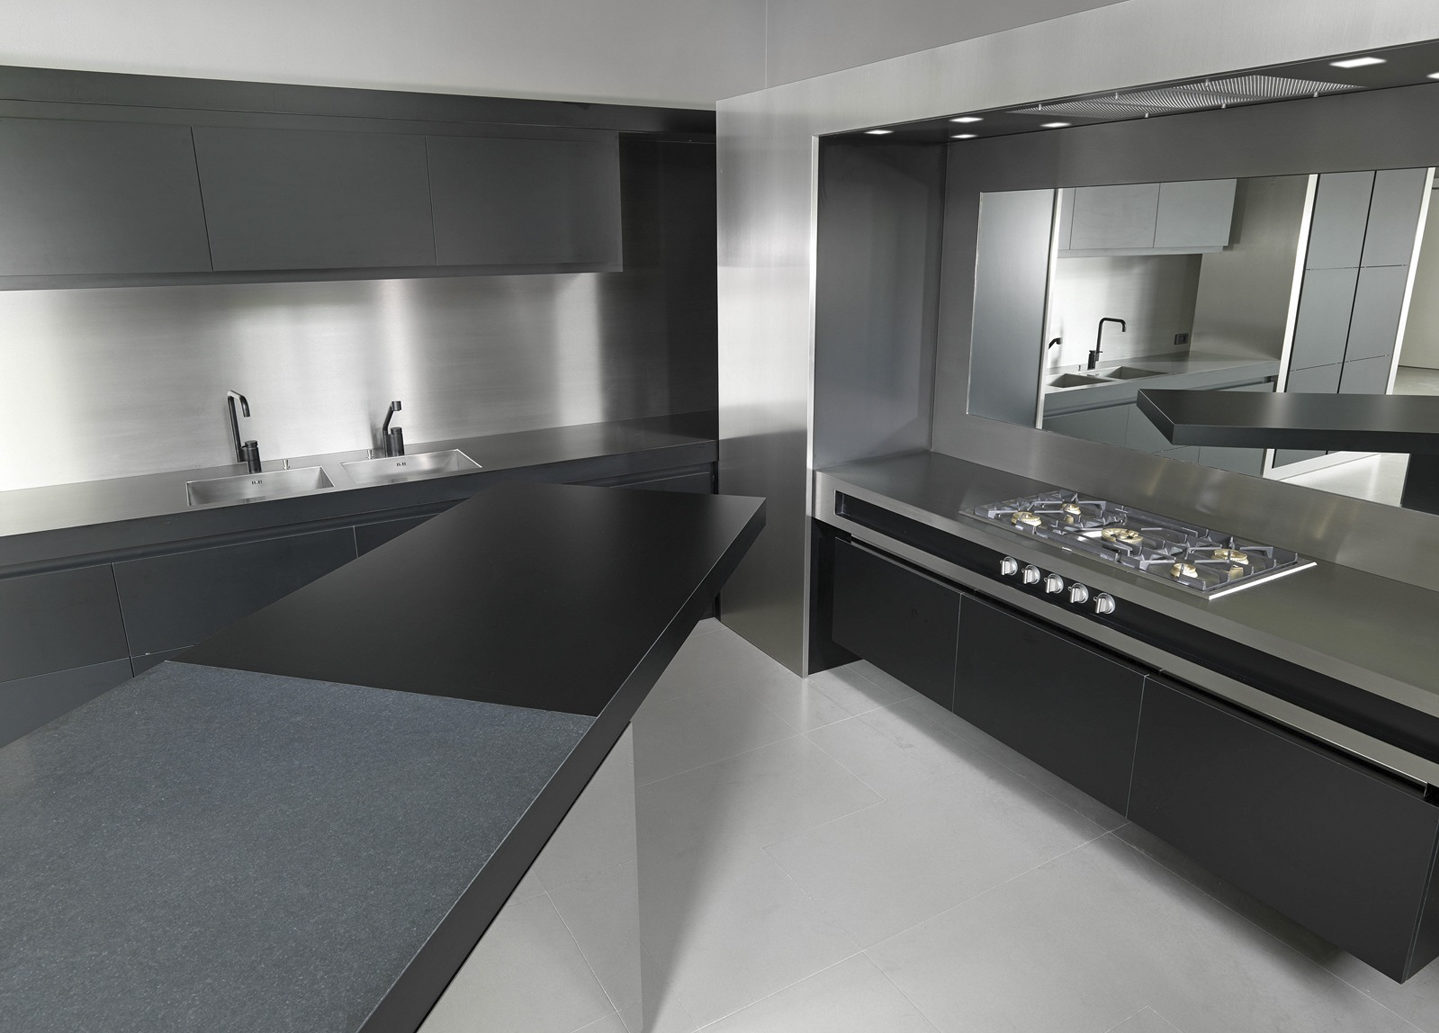 Strato_design_Non Plus Ultra_bespoke kitchen project in Milano with turning kitchen island_Stratocolor black_stone_mat and mirror stainless steel_2009_05